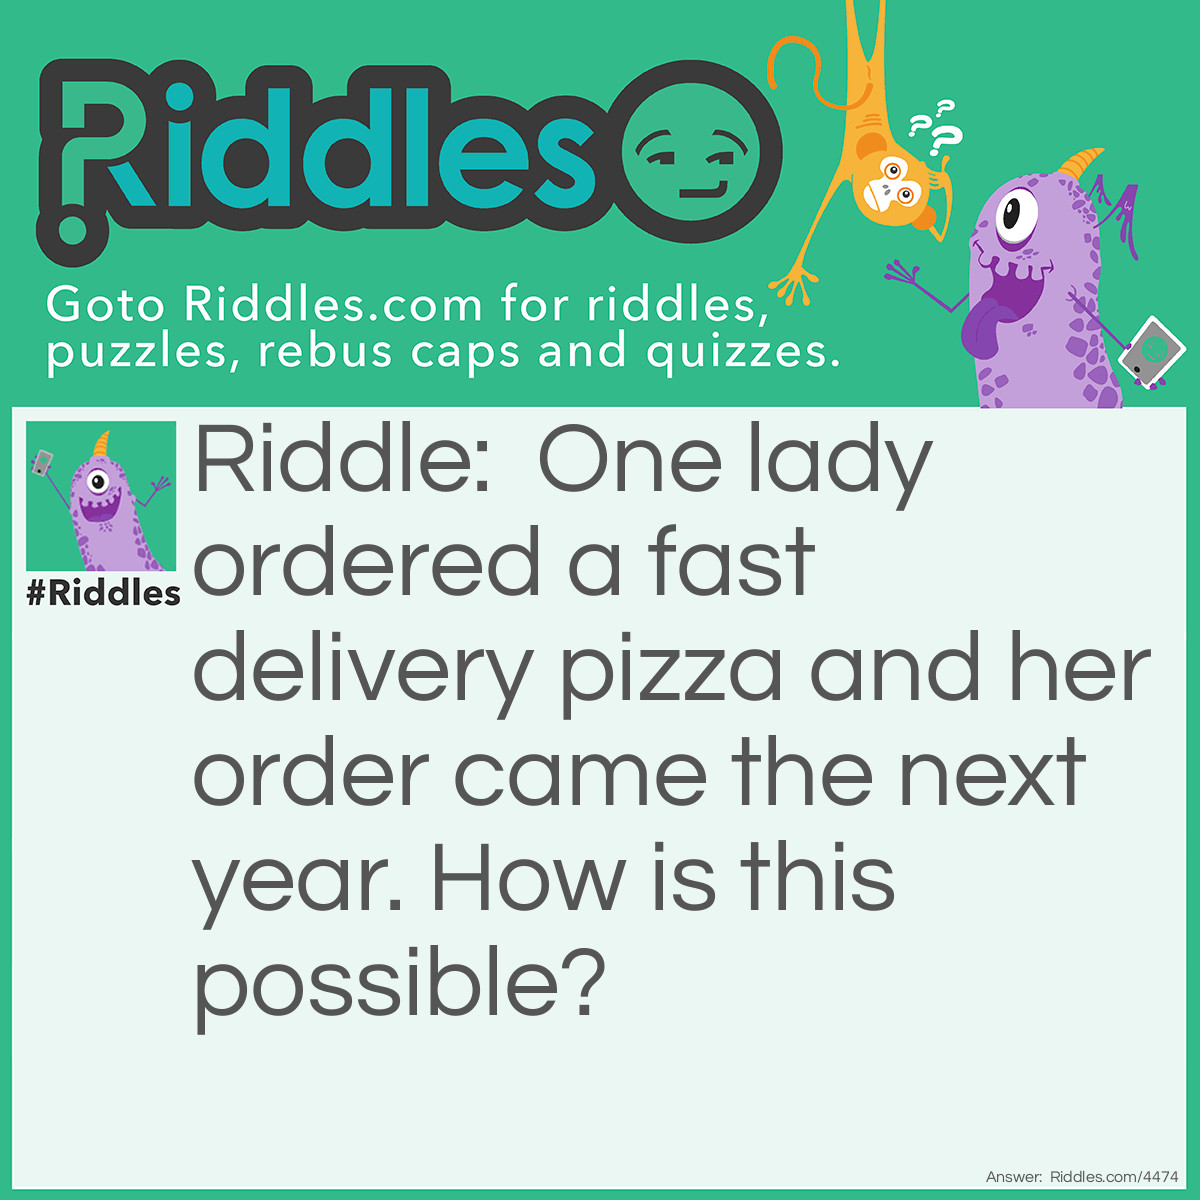 Riddle: One lady ordered a fast delivery pizza and her order came the next year. How is this possible? Answer: She ordered the pizza for New Year's Day.